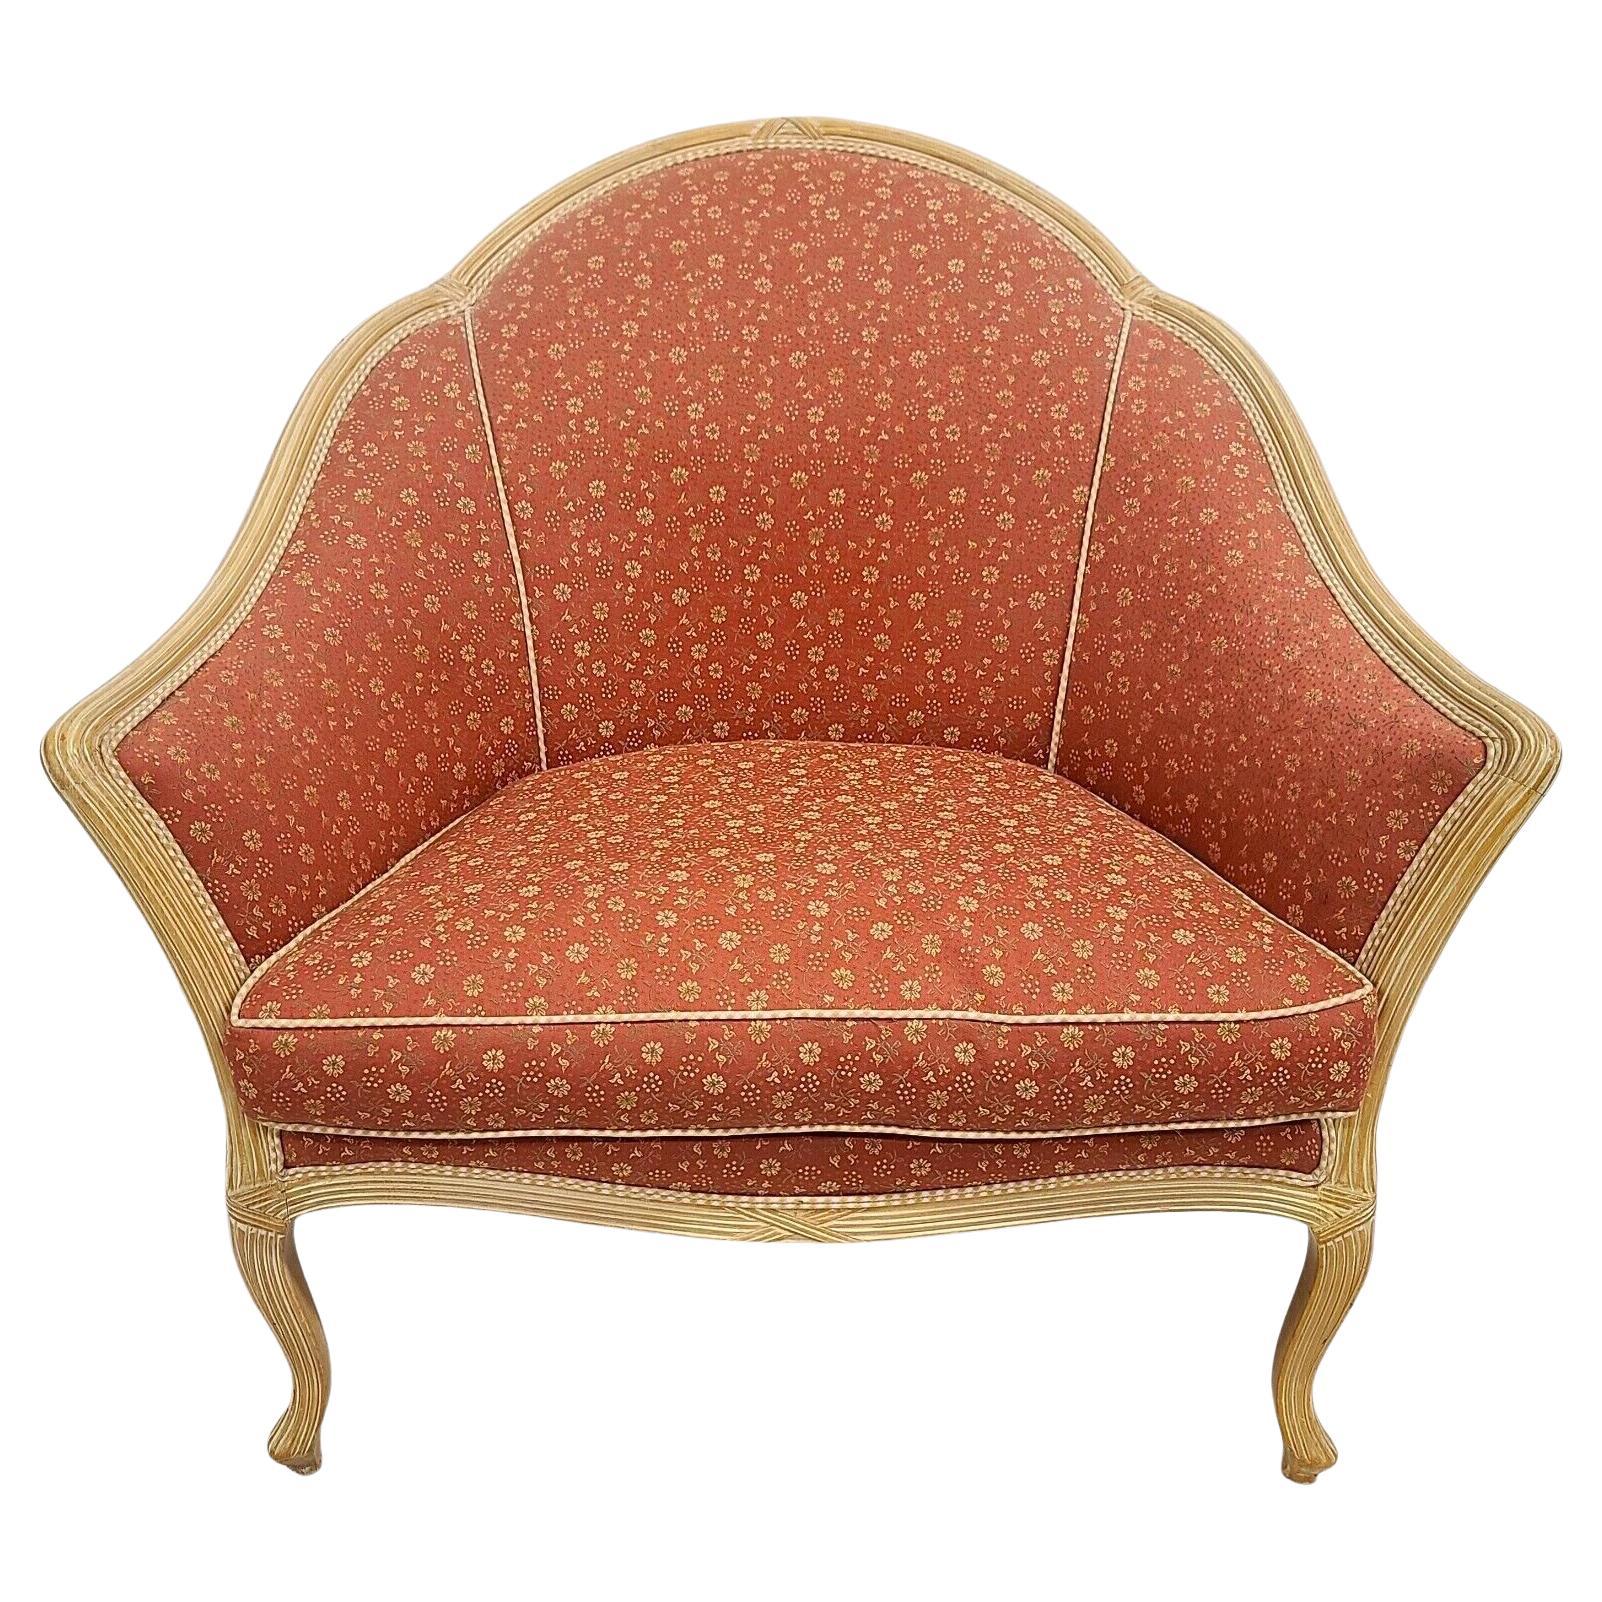 Custom Designer French Provincial Louis XV Floral Apricot Settee Chair